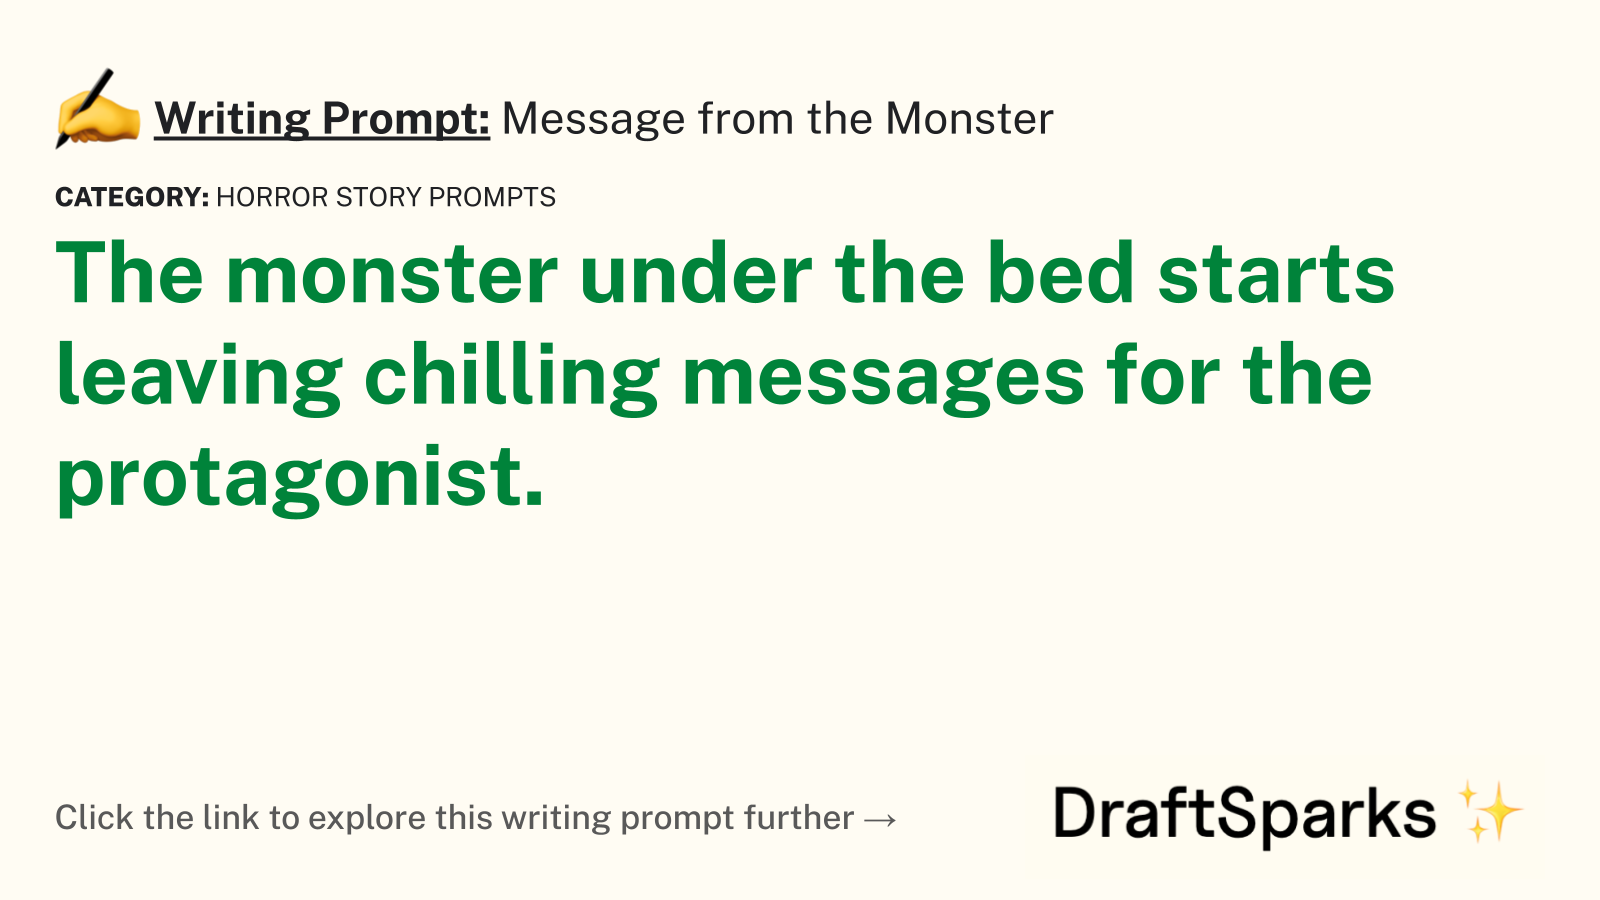 Message from the Monster